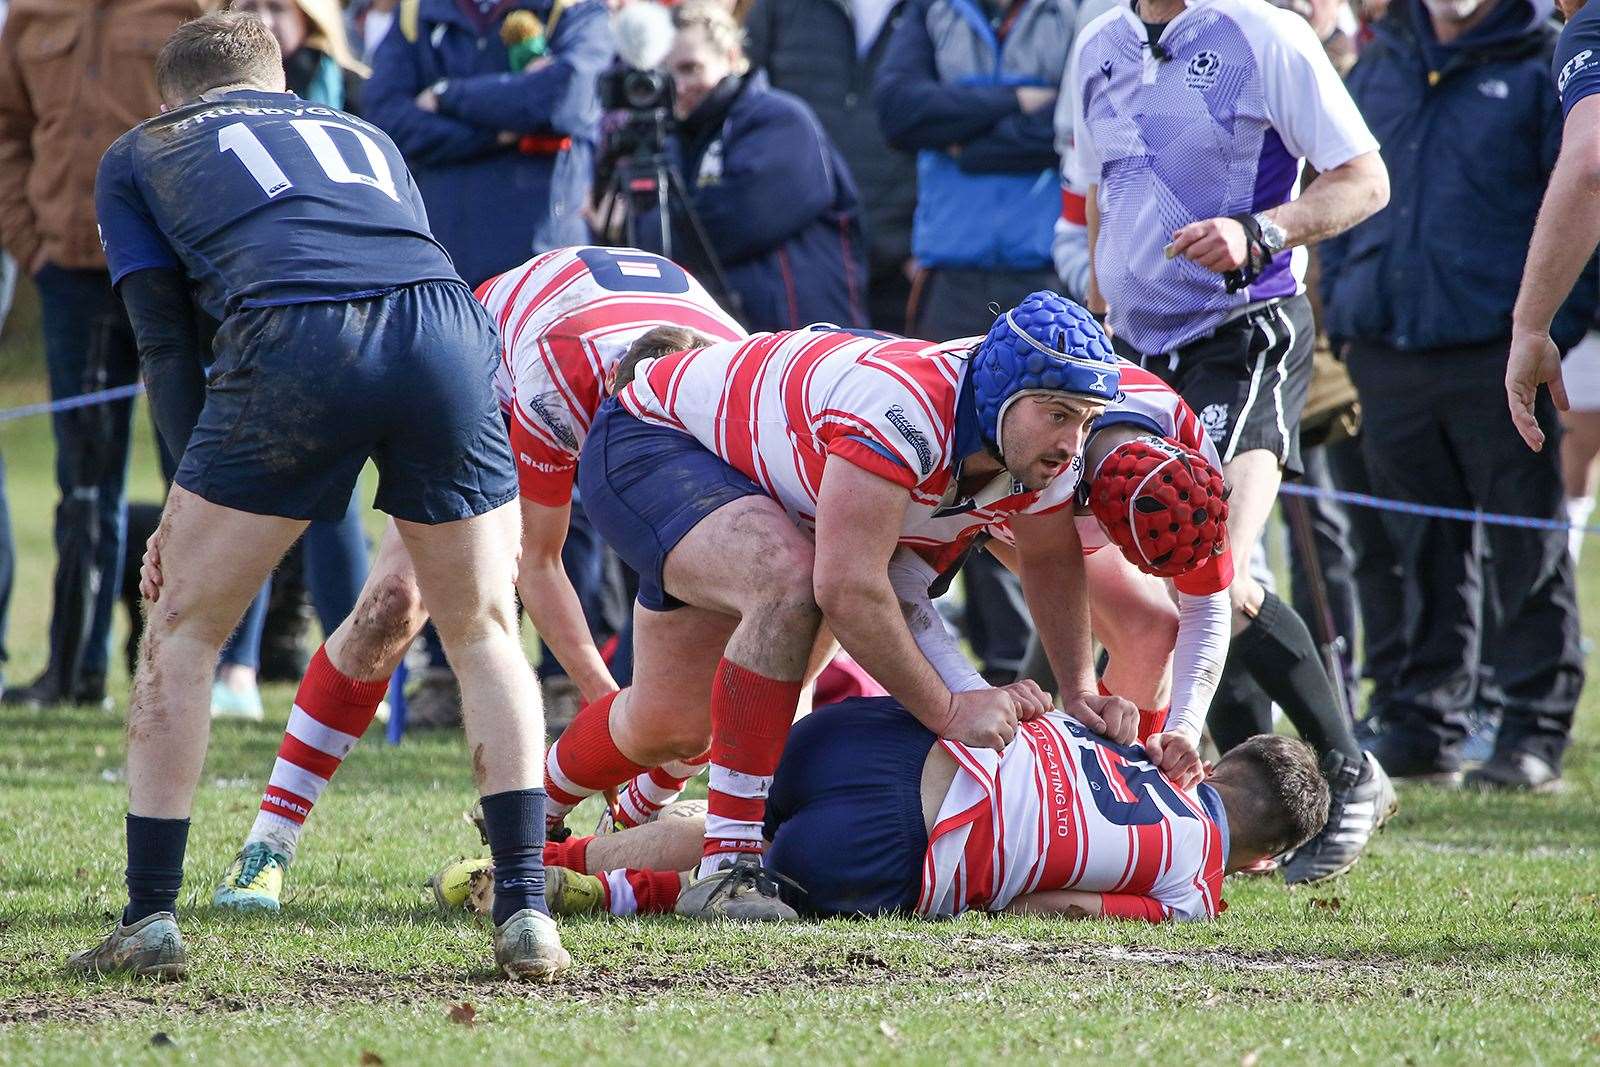 Rory Millar sets ruck with David Clarke over the ball. Picture: John MacGregor